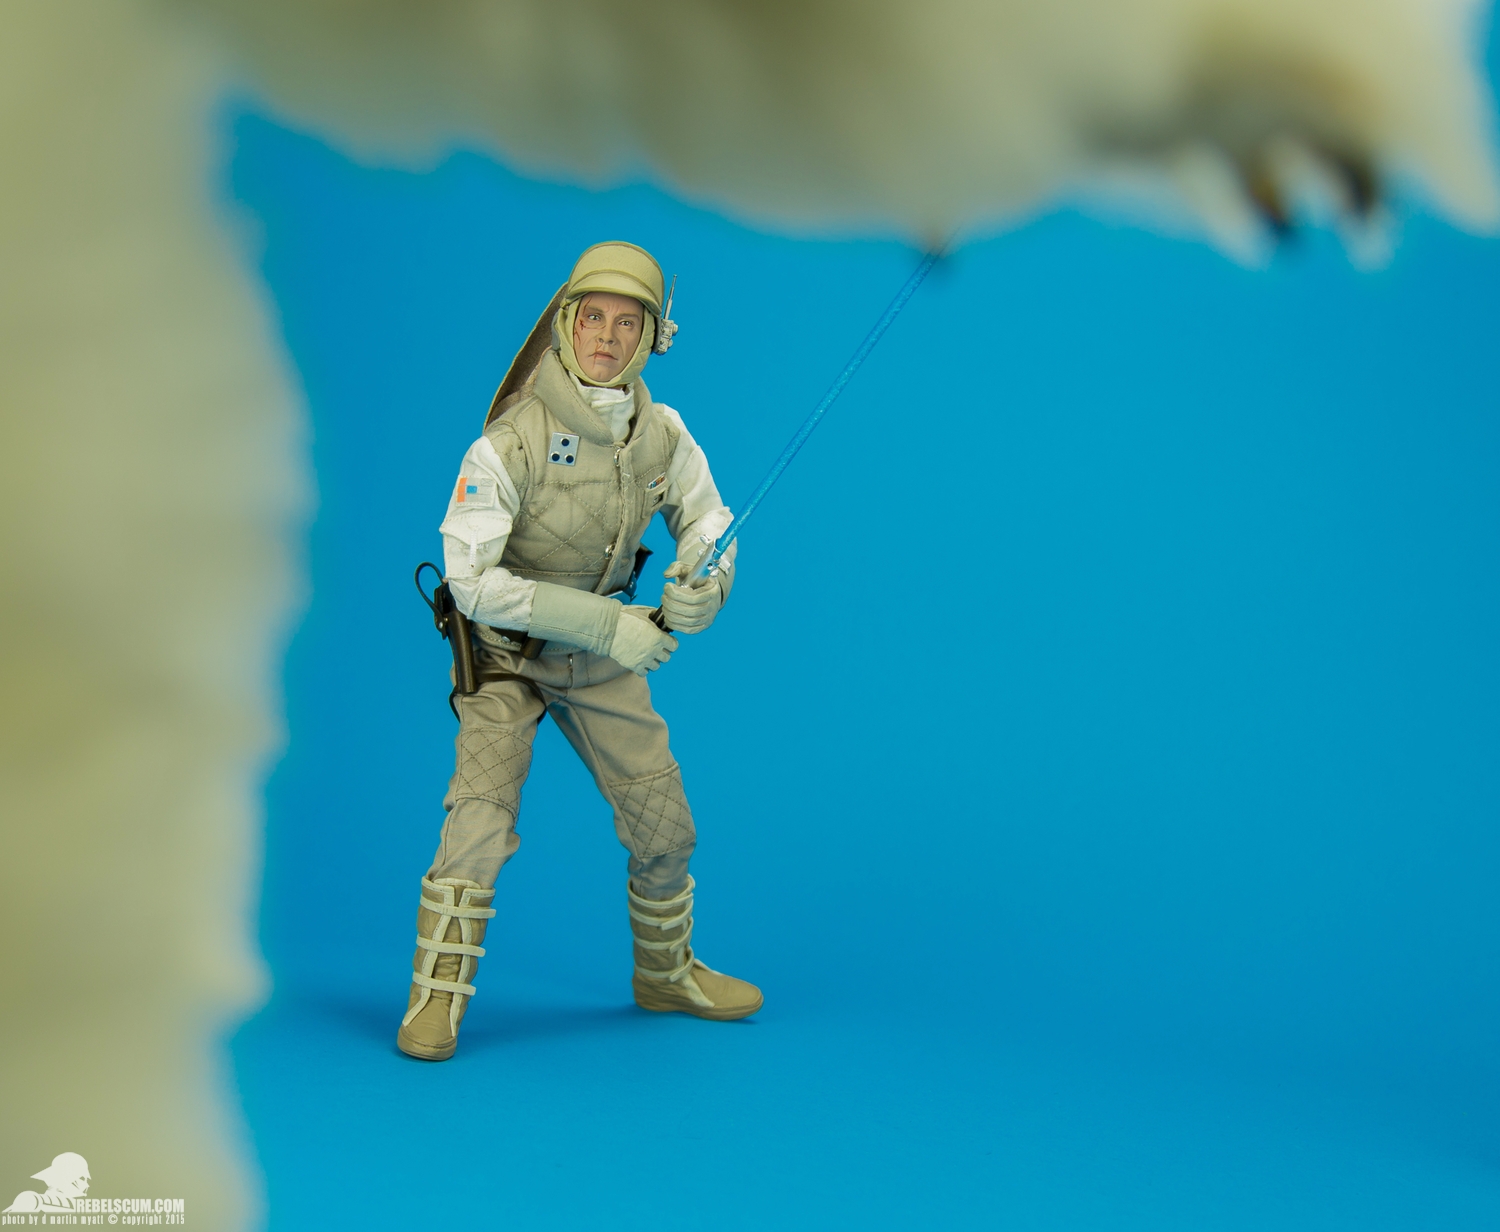 Luke-Skywalker-Hoth-Sixth-Scale-Sideshow-Collectibles-Star-Wars-038.jpg